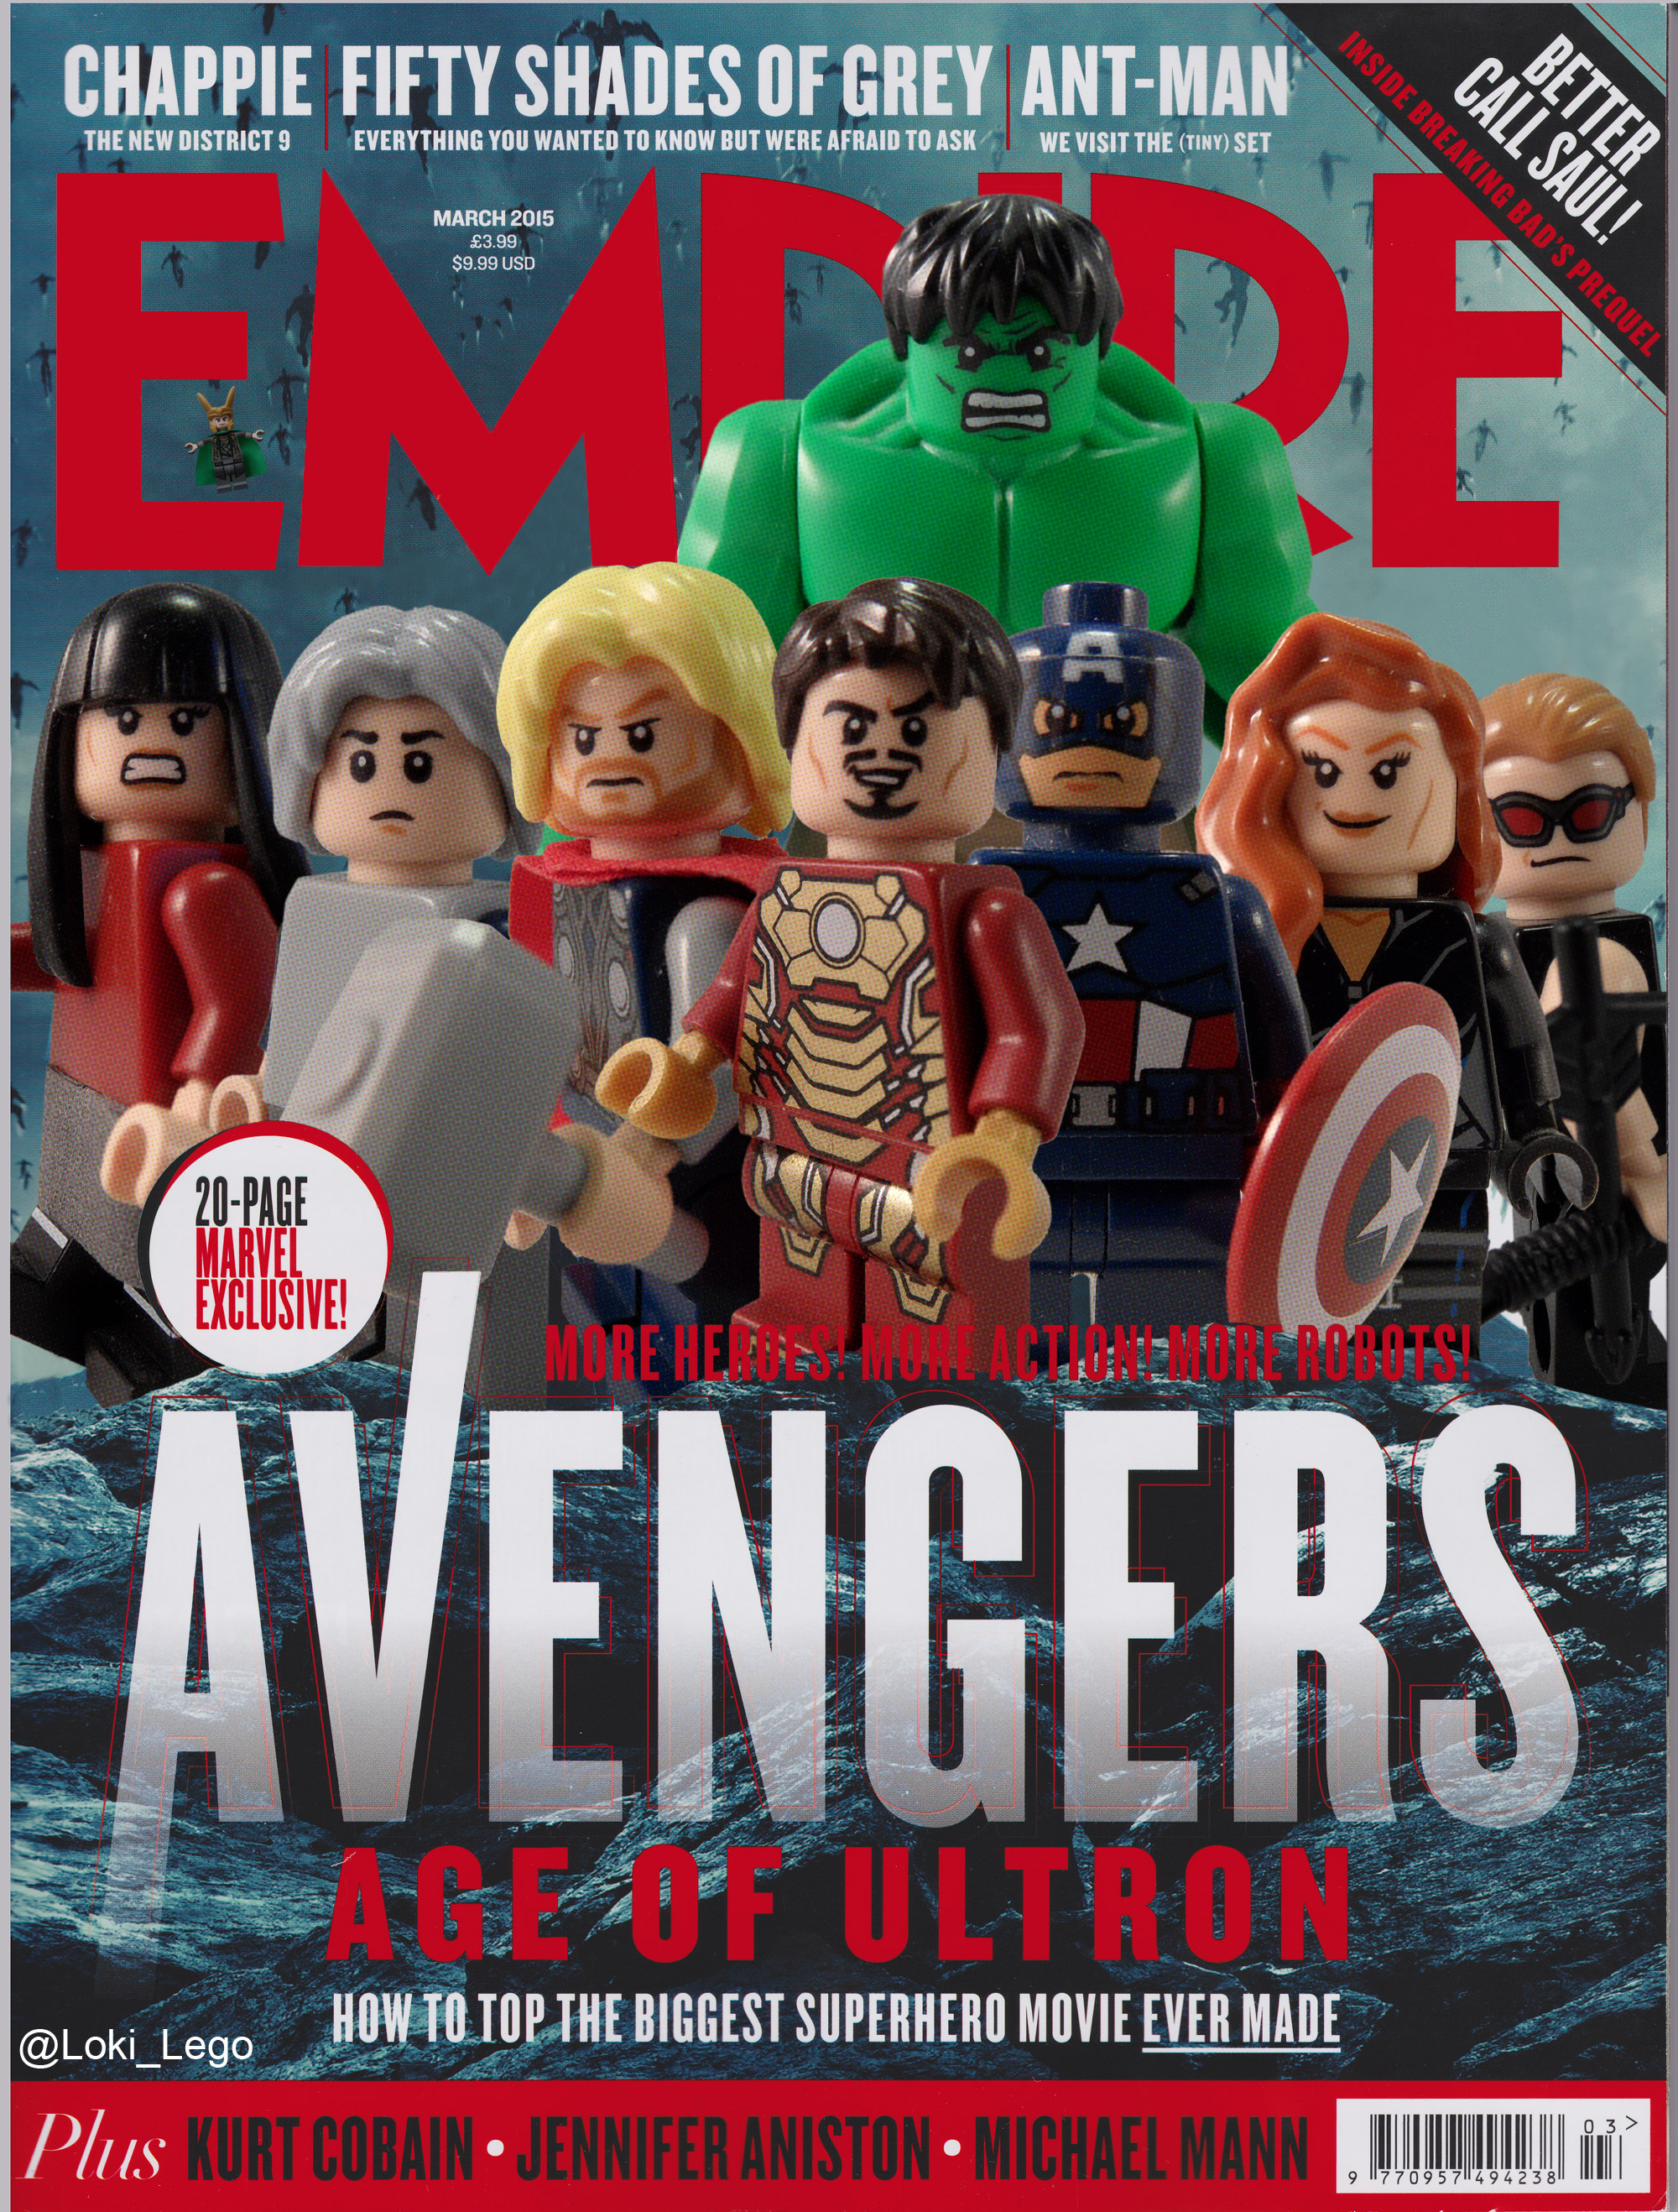 Read more about the article Lego Avengers Assemble on the Avengers: Age of Ultron Cover of Empire Magazine